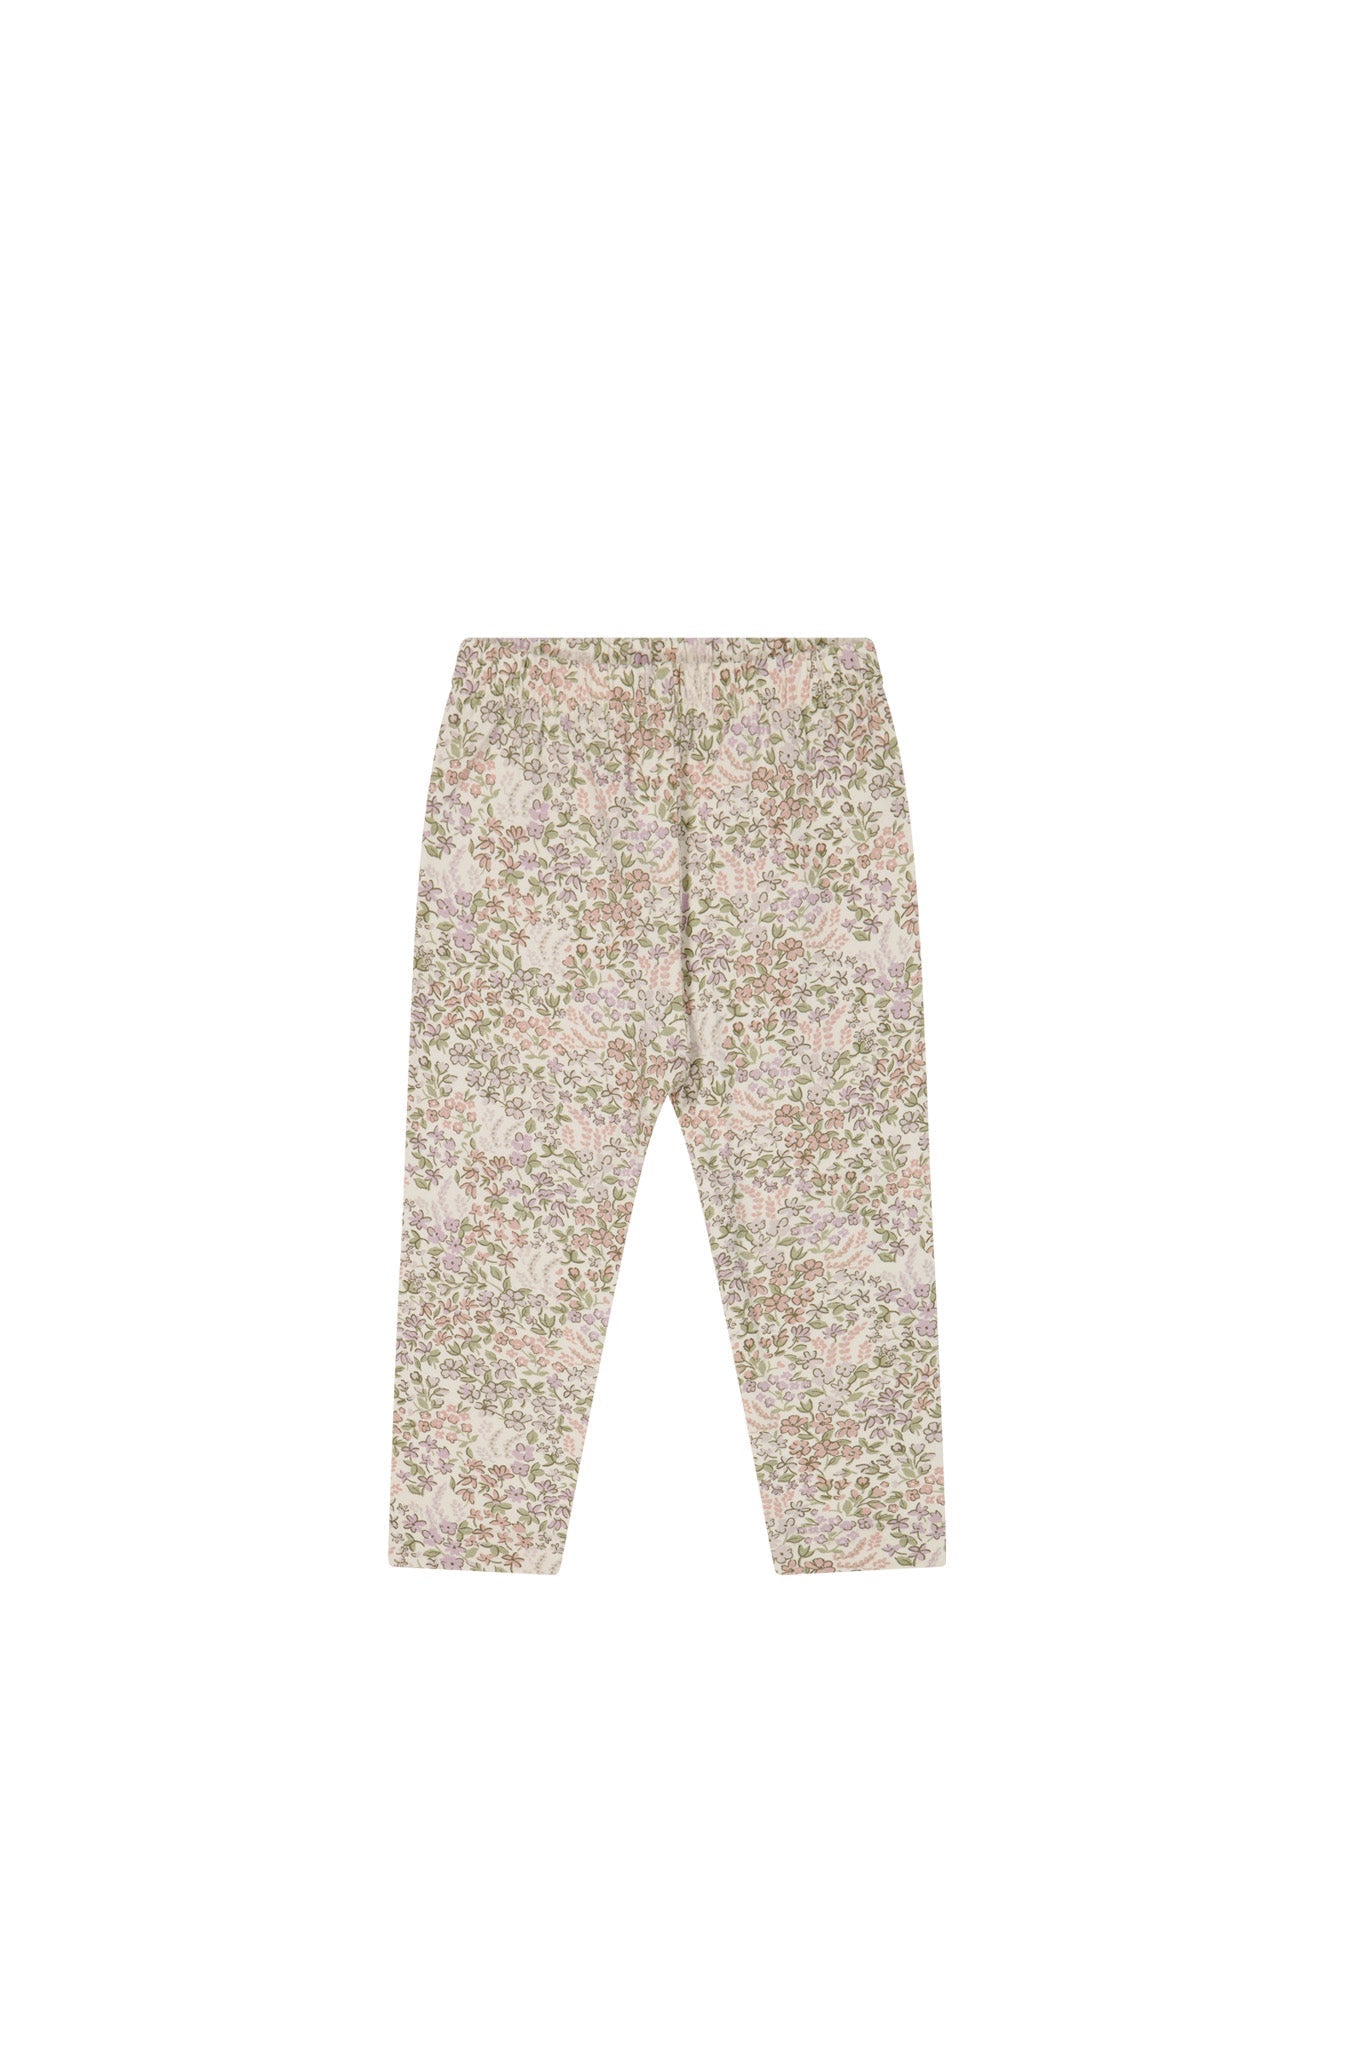 Organic Cotton Everyday Legging - April Eggnog-Clothing & Accessories-Jamie Kay-The Bay Room